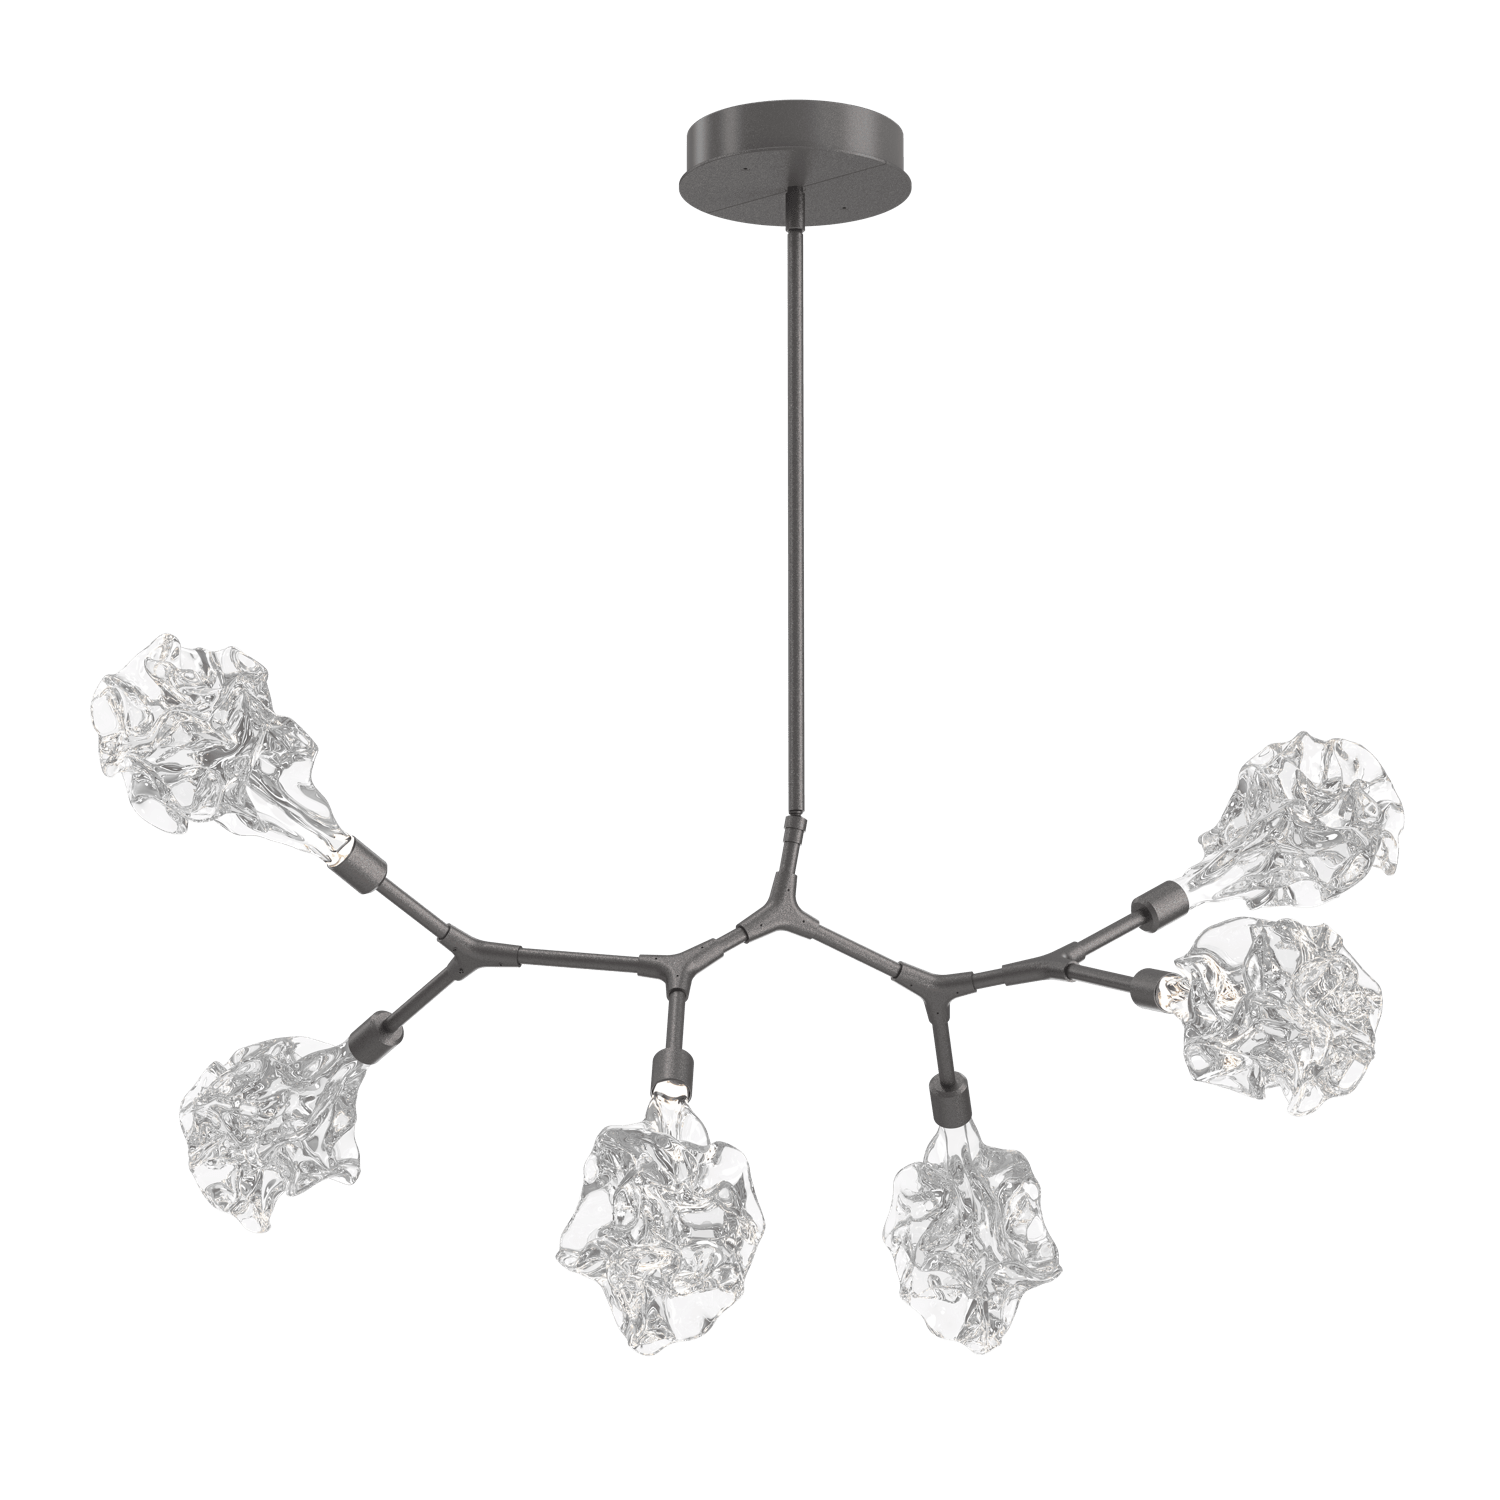 PLB0059-BA-GP-Hammerton-Studio-Blossom-6-light-organic-branch-chandelier-with-graphite-finish-and-clear-handblown-crystal-glass-shades-and-LED-lamping